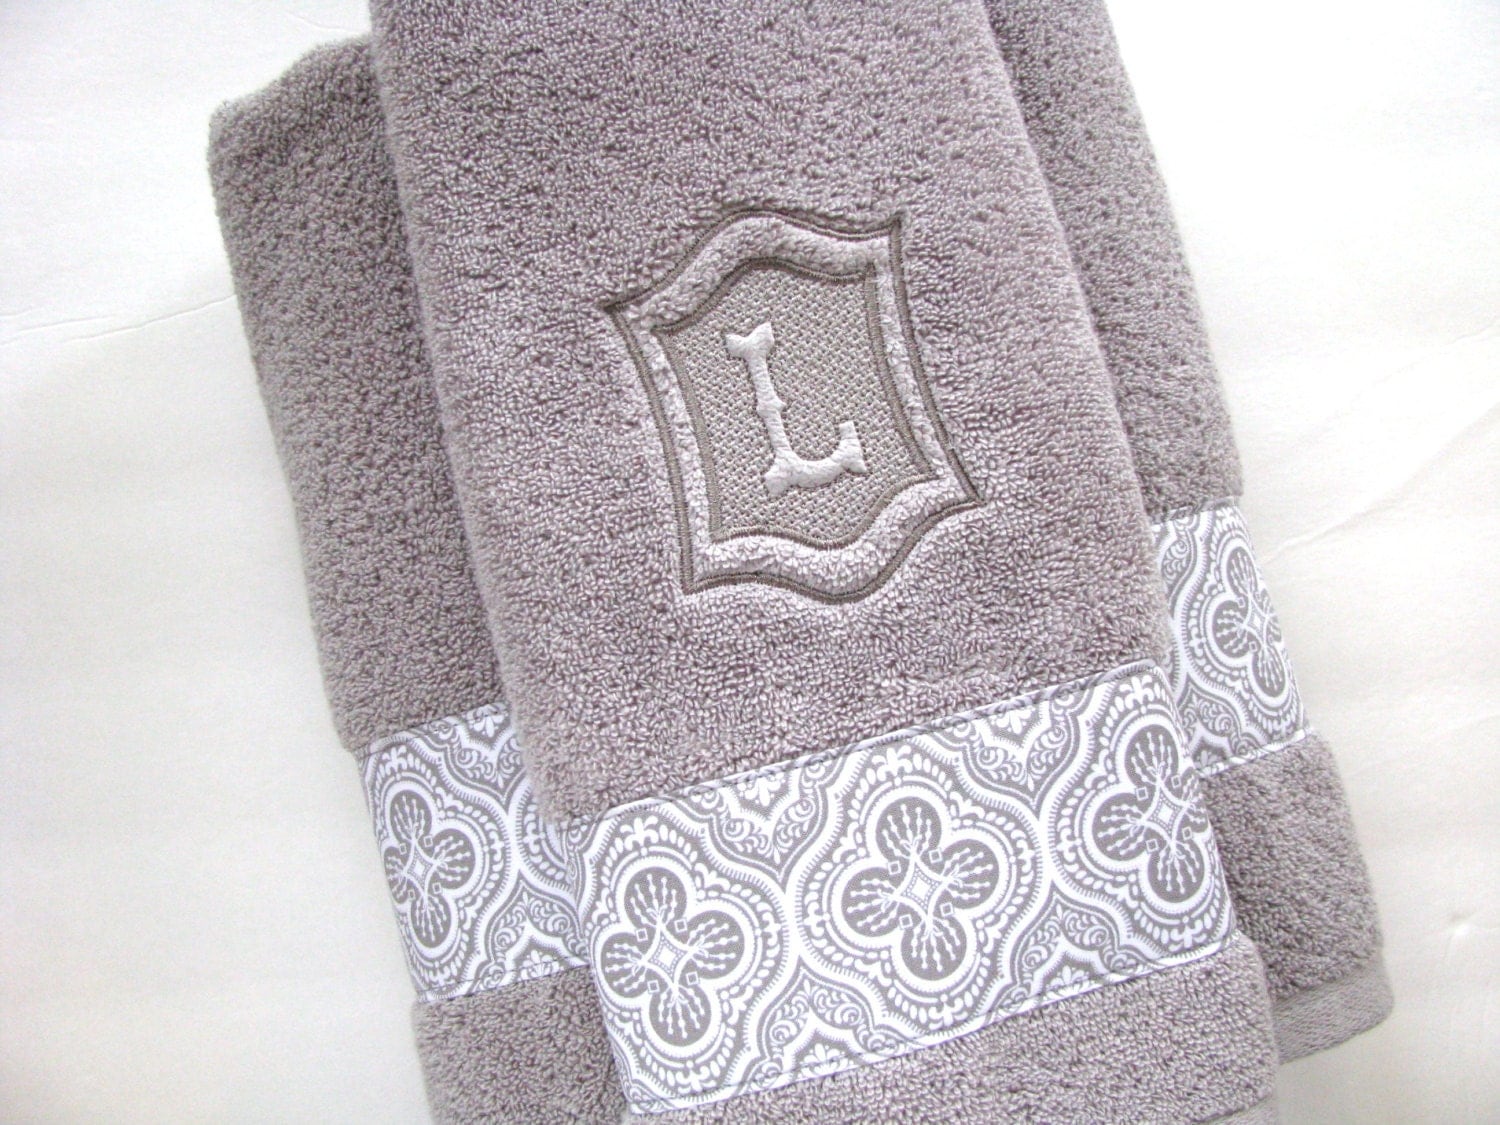 Personalized Towels hand towel bathroom personalized gift